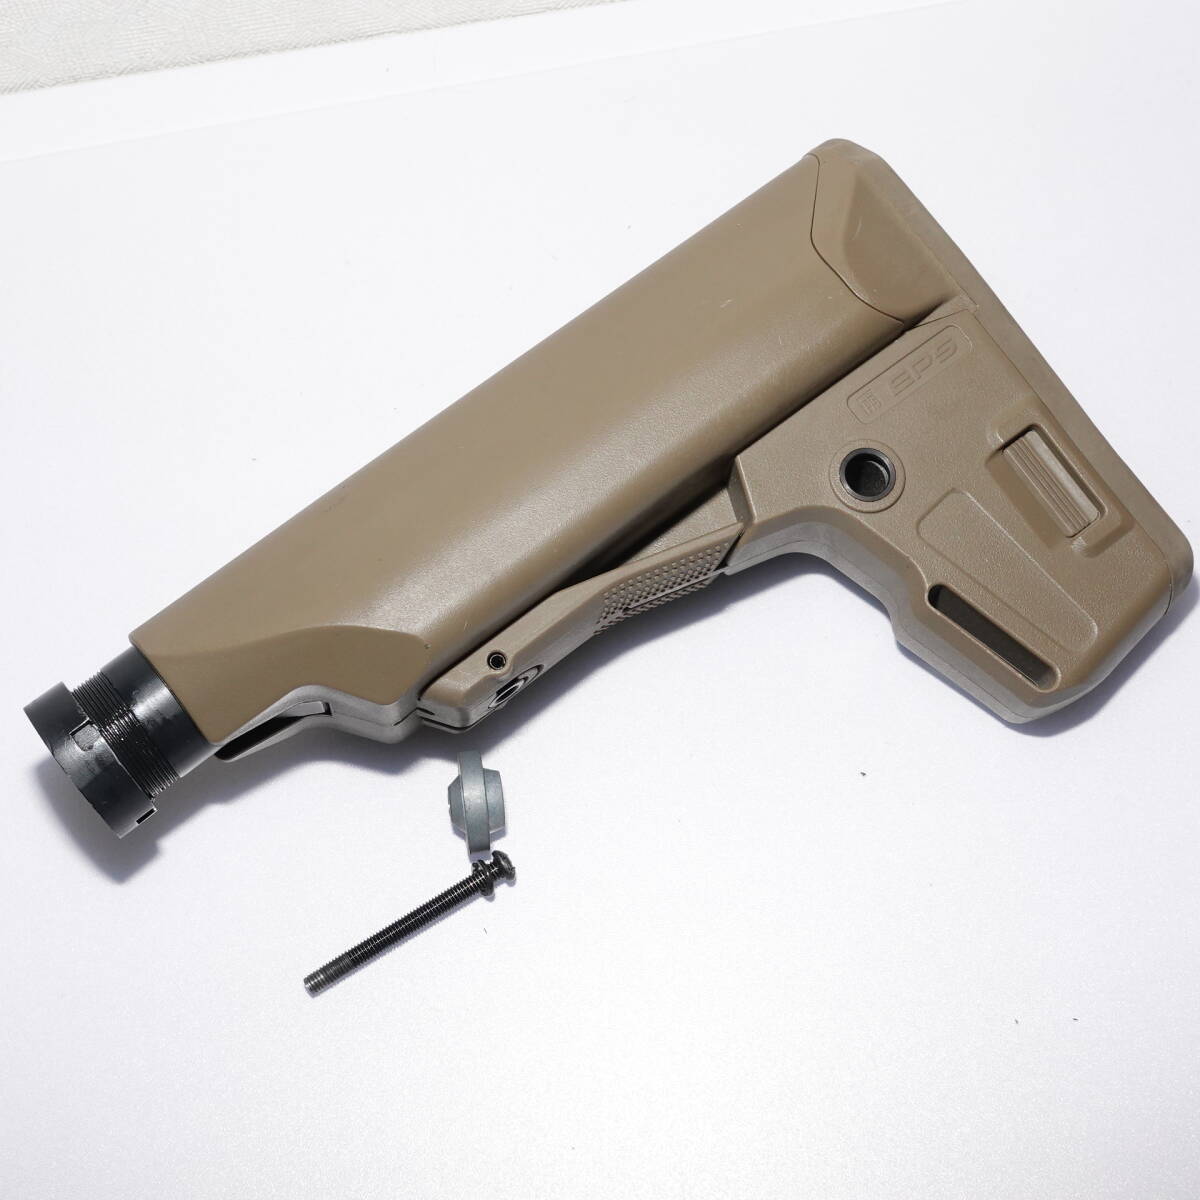  Manufacturers unknown PTS EPS type stock FDE translation have 